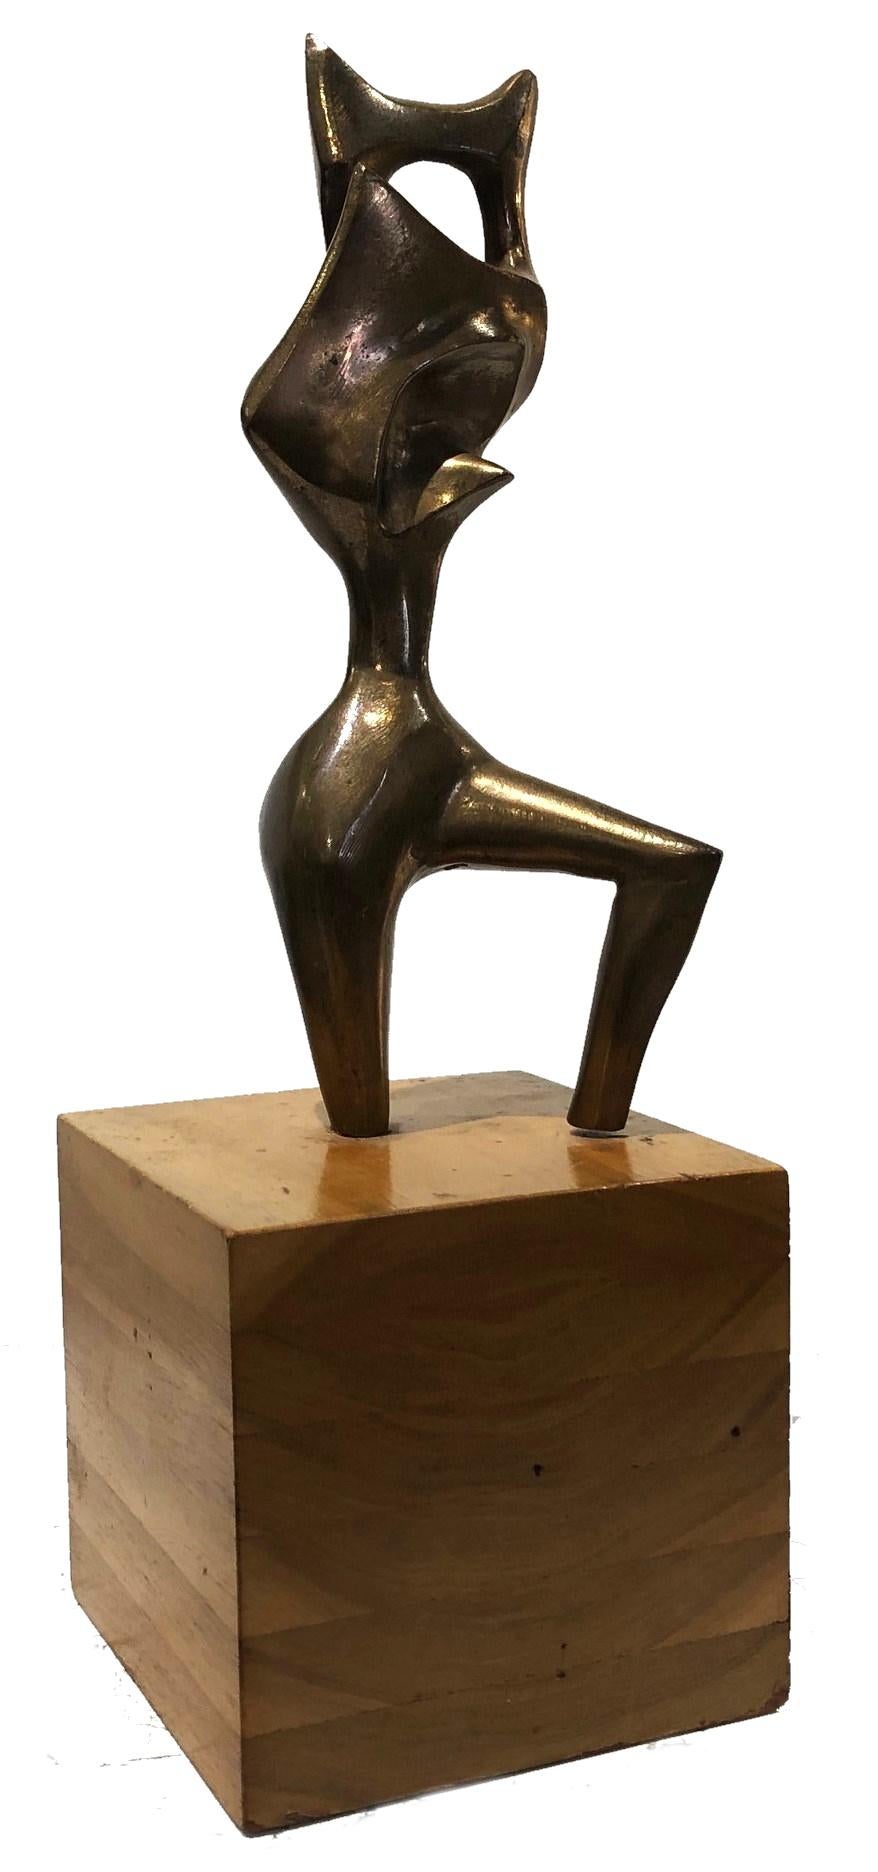 Surrealist Abstract Sculpture
In the manner of
Wifredo Lam
ca. 1950’s-60’s

DIMENSIONS
Height (w/ base): 11.25 inches            
Height of base: 5 inches            
Width: 5 inches            
Depth: 5 inches

ABOUT
Surrealist abstract patinated